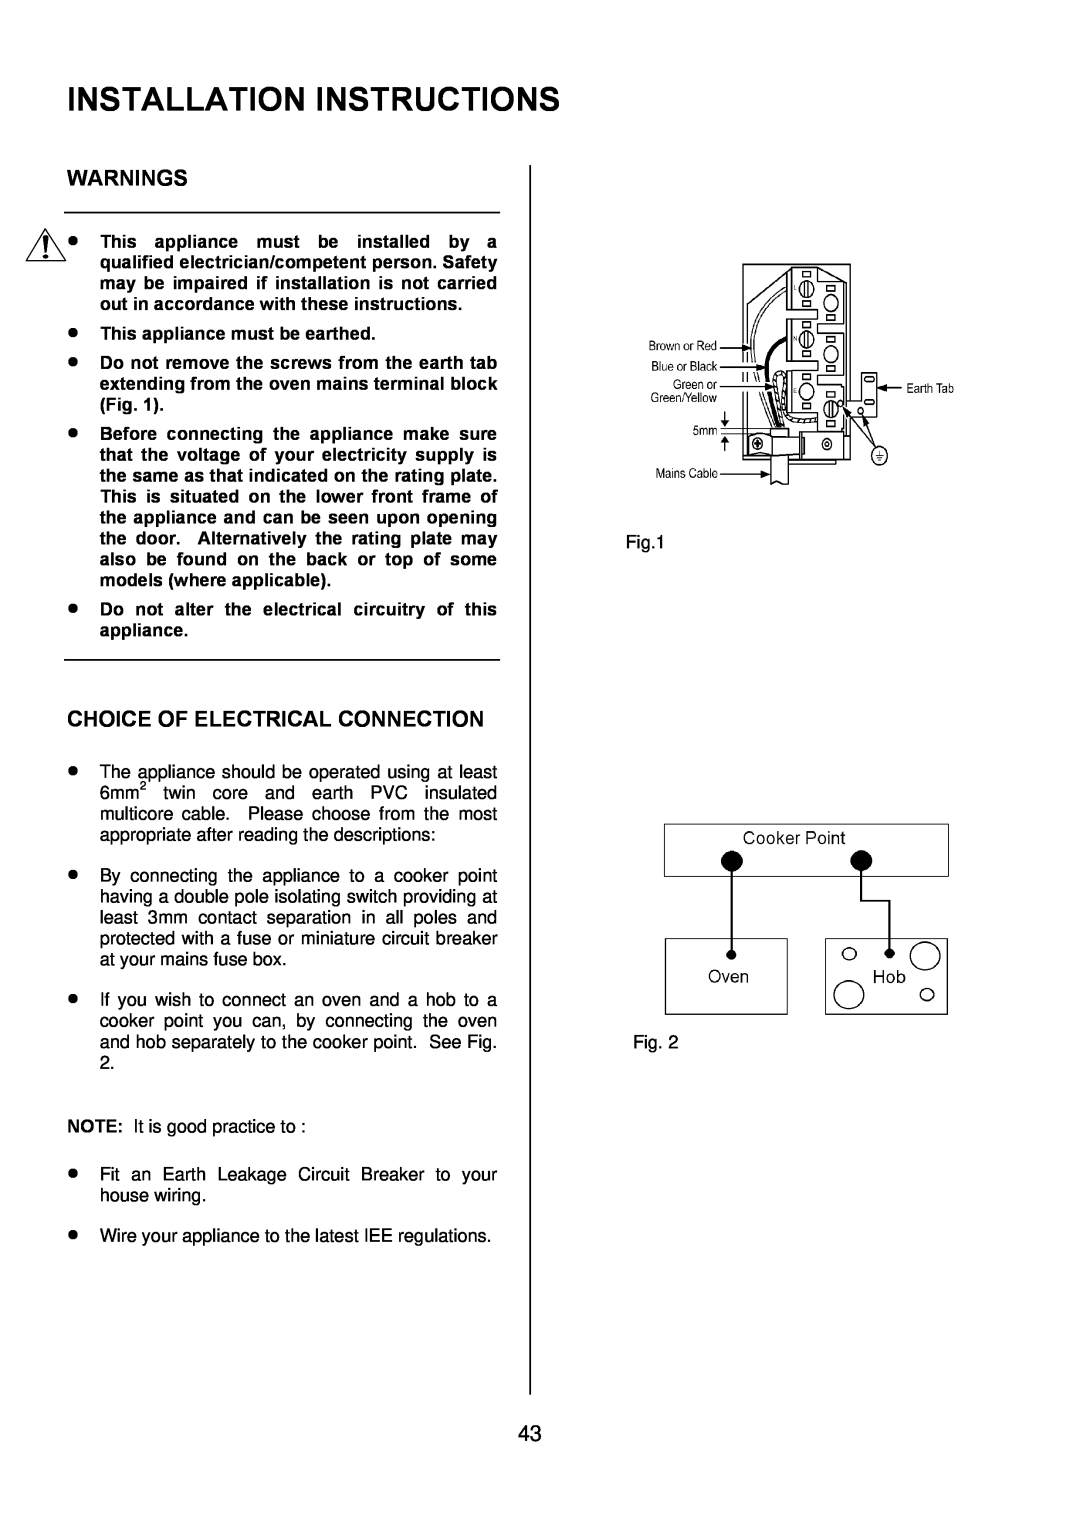 Zanussi ZUQ 875 manual Installation Instructions, Warnings, Choice Of Electrical Connection, This appliance must be earthed 